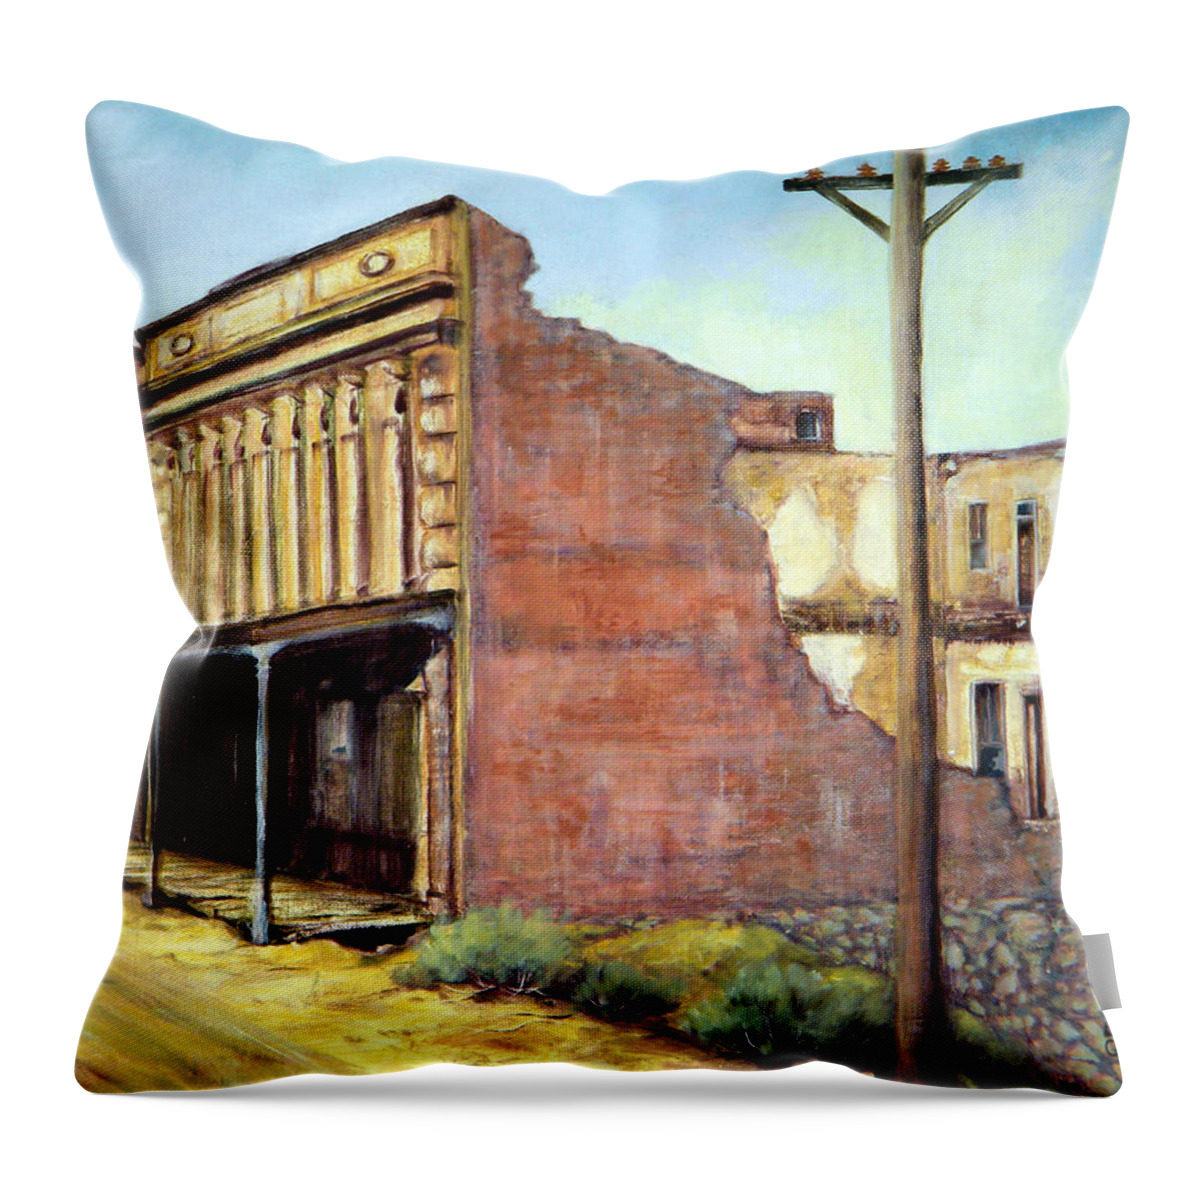 West Throw Pillow featuring the painting Wells Fargo Virginia City Nevada by Evelyne Boynton Grierson